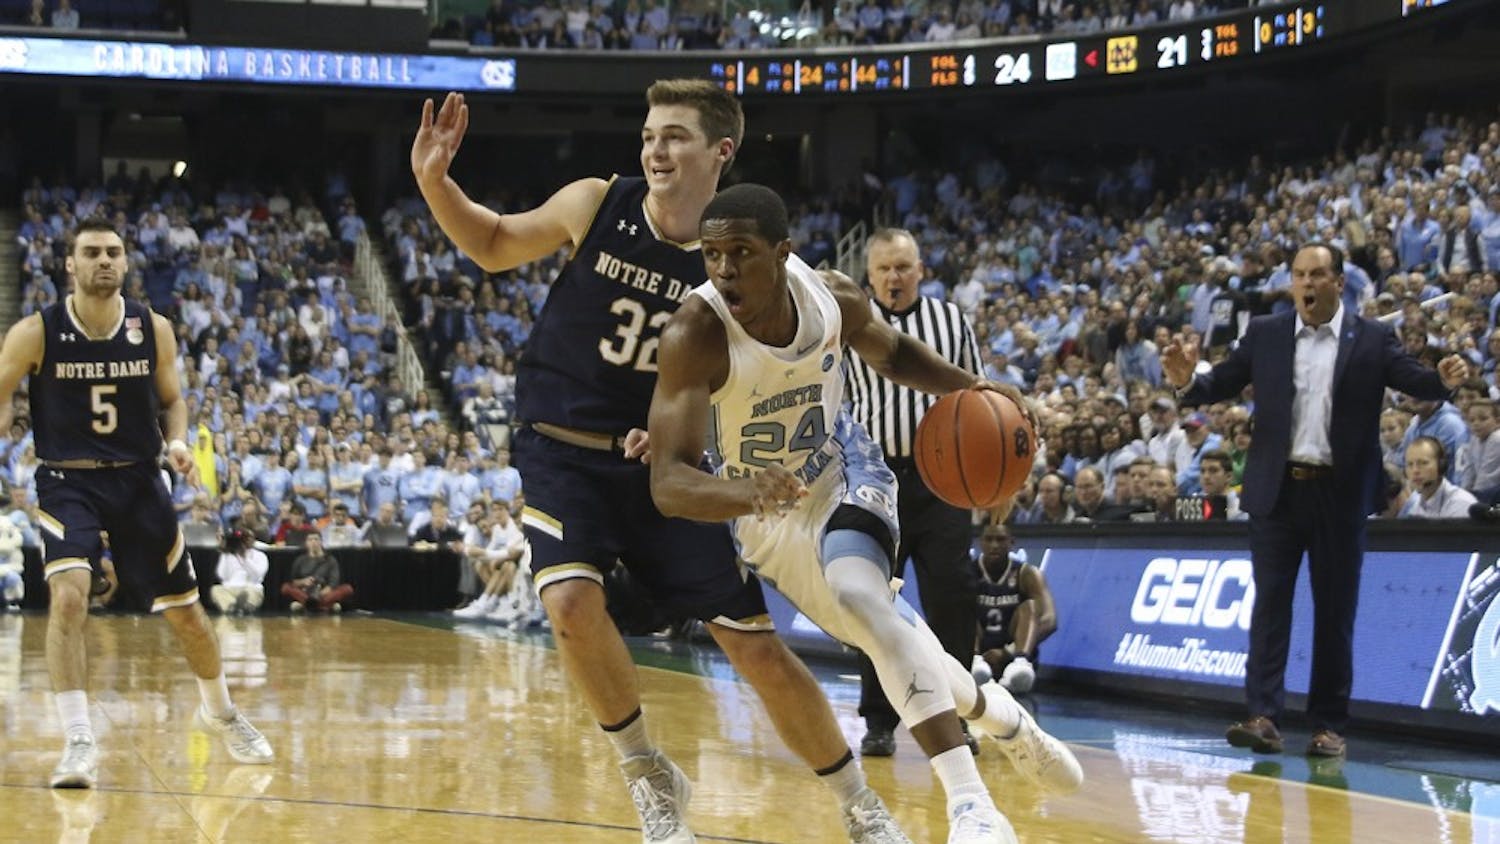 UNC guard Kenny Williams (24) drives in the lane against Notre Dame in Greensboro on Sunday.